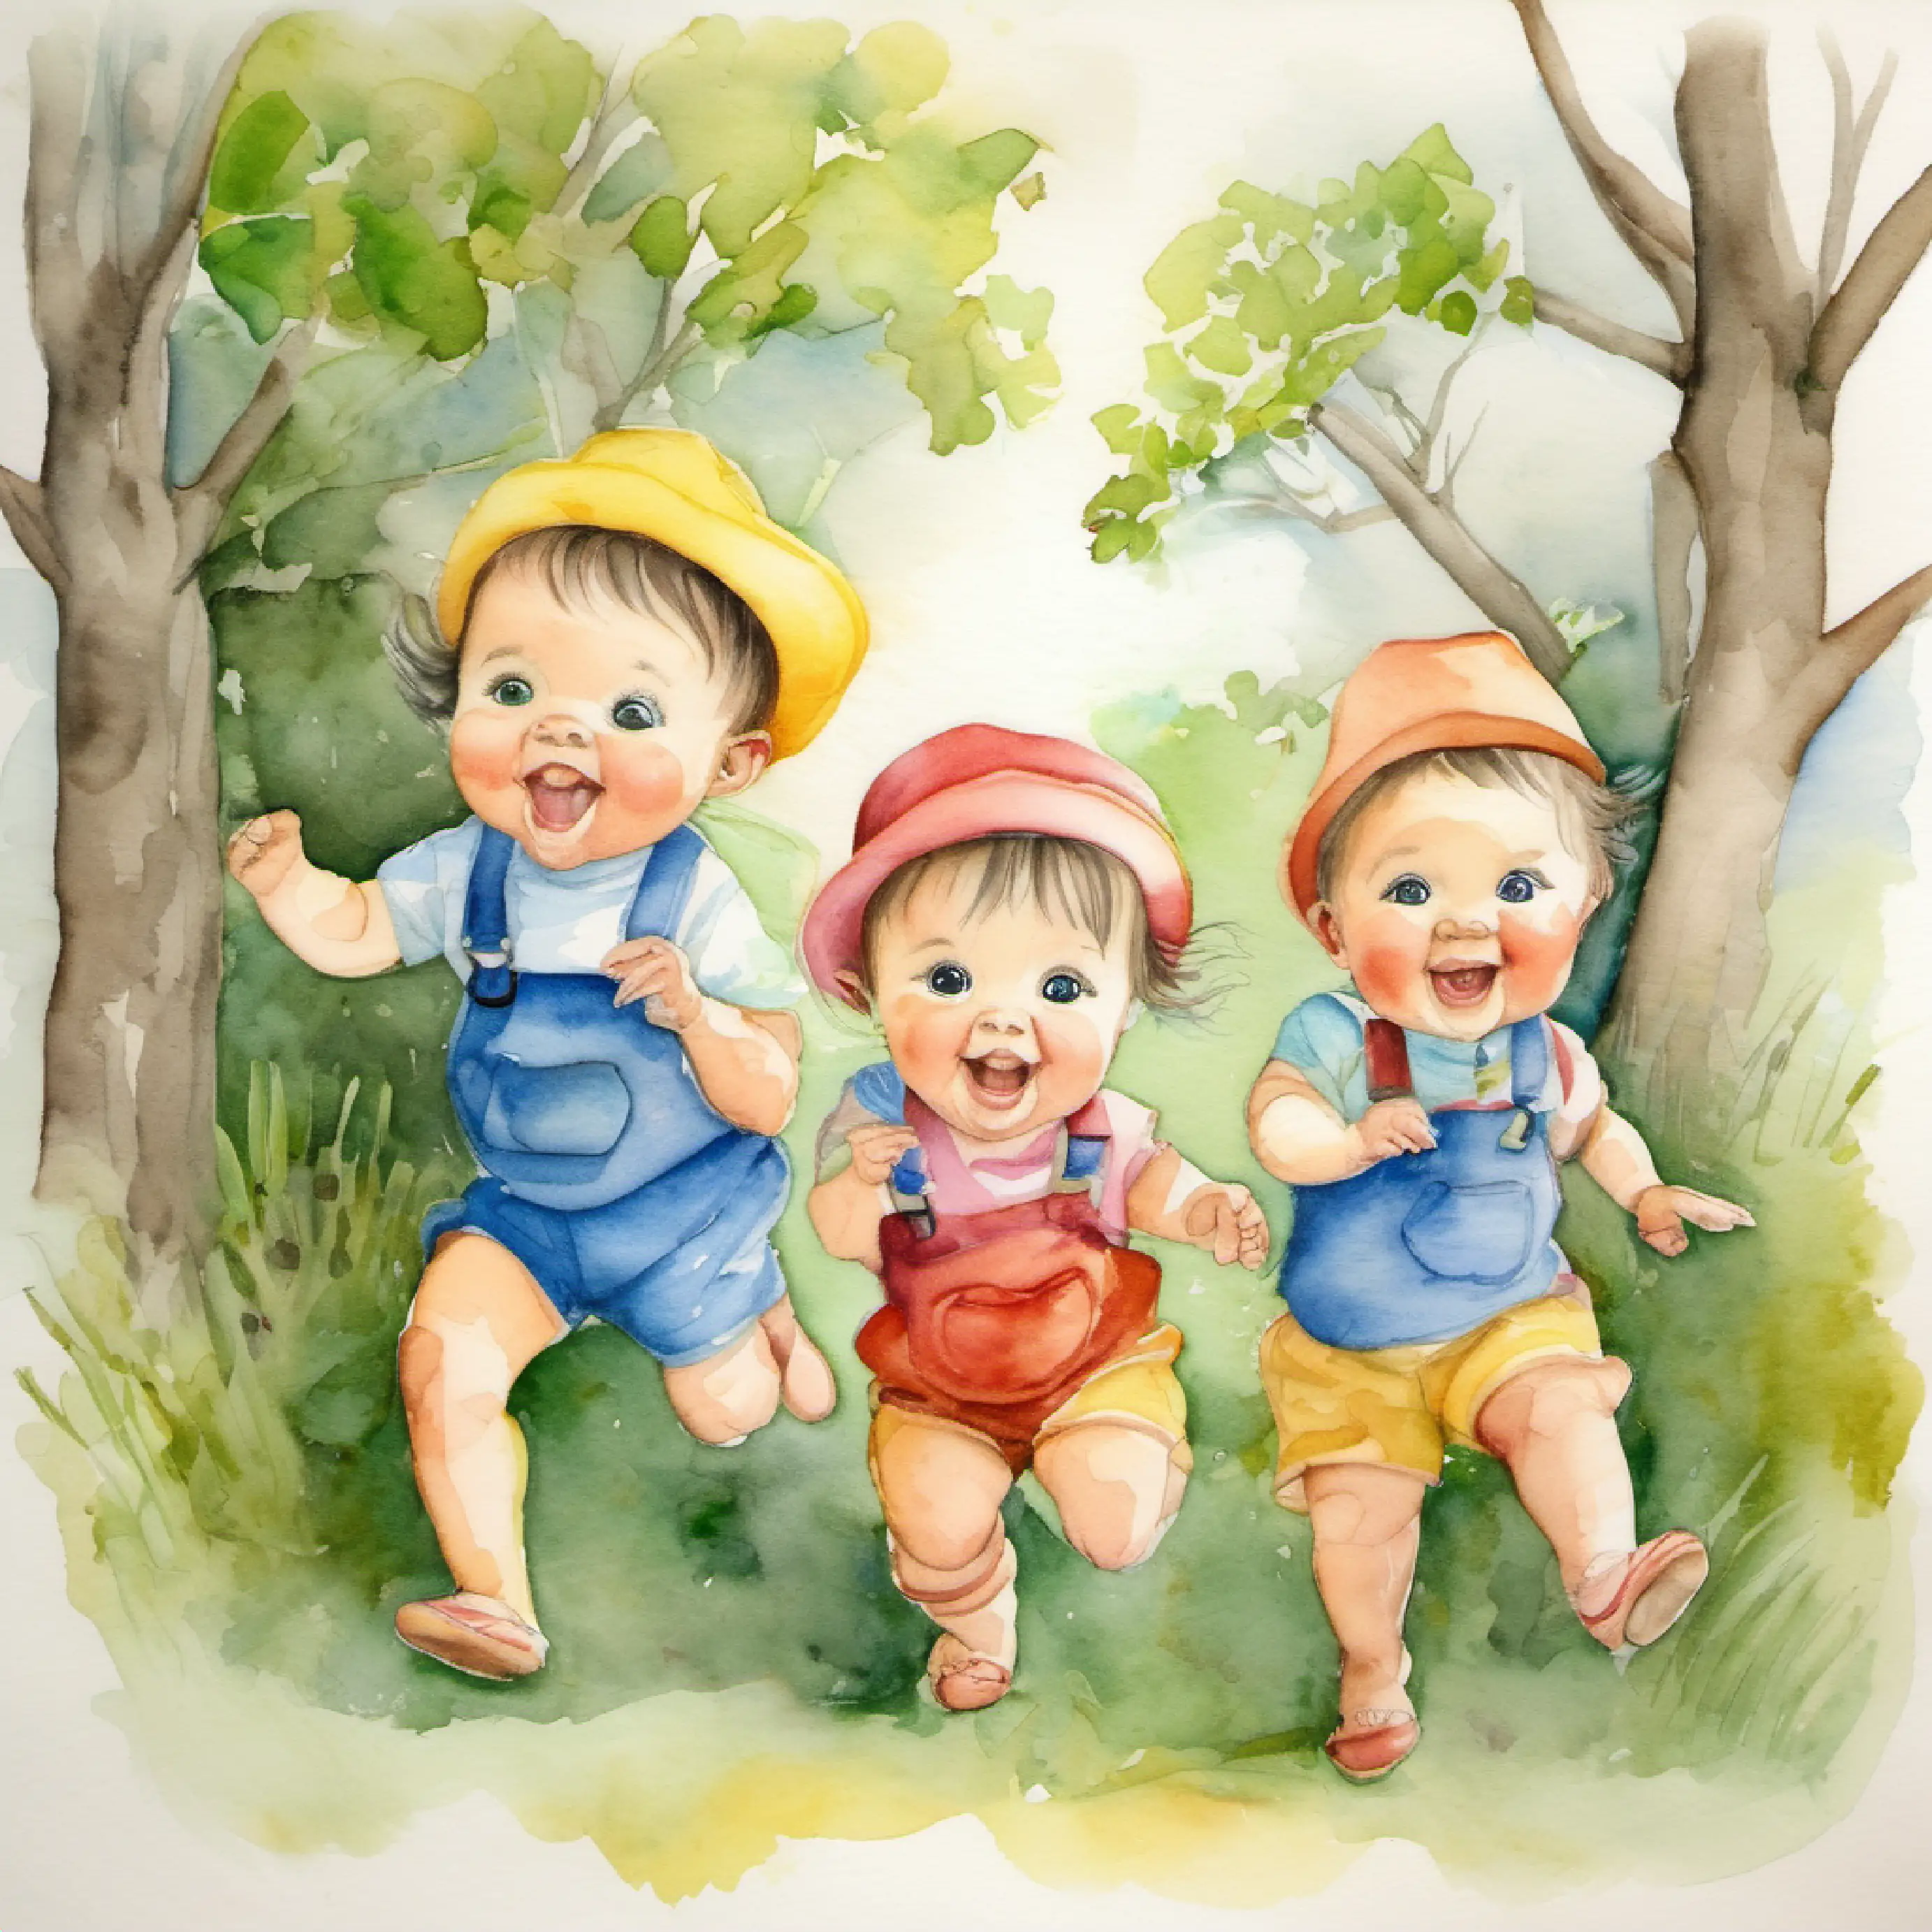 Introduction to Triplets, playful, adventurous, shows their mischievous nature.